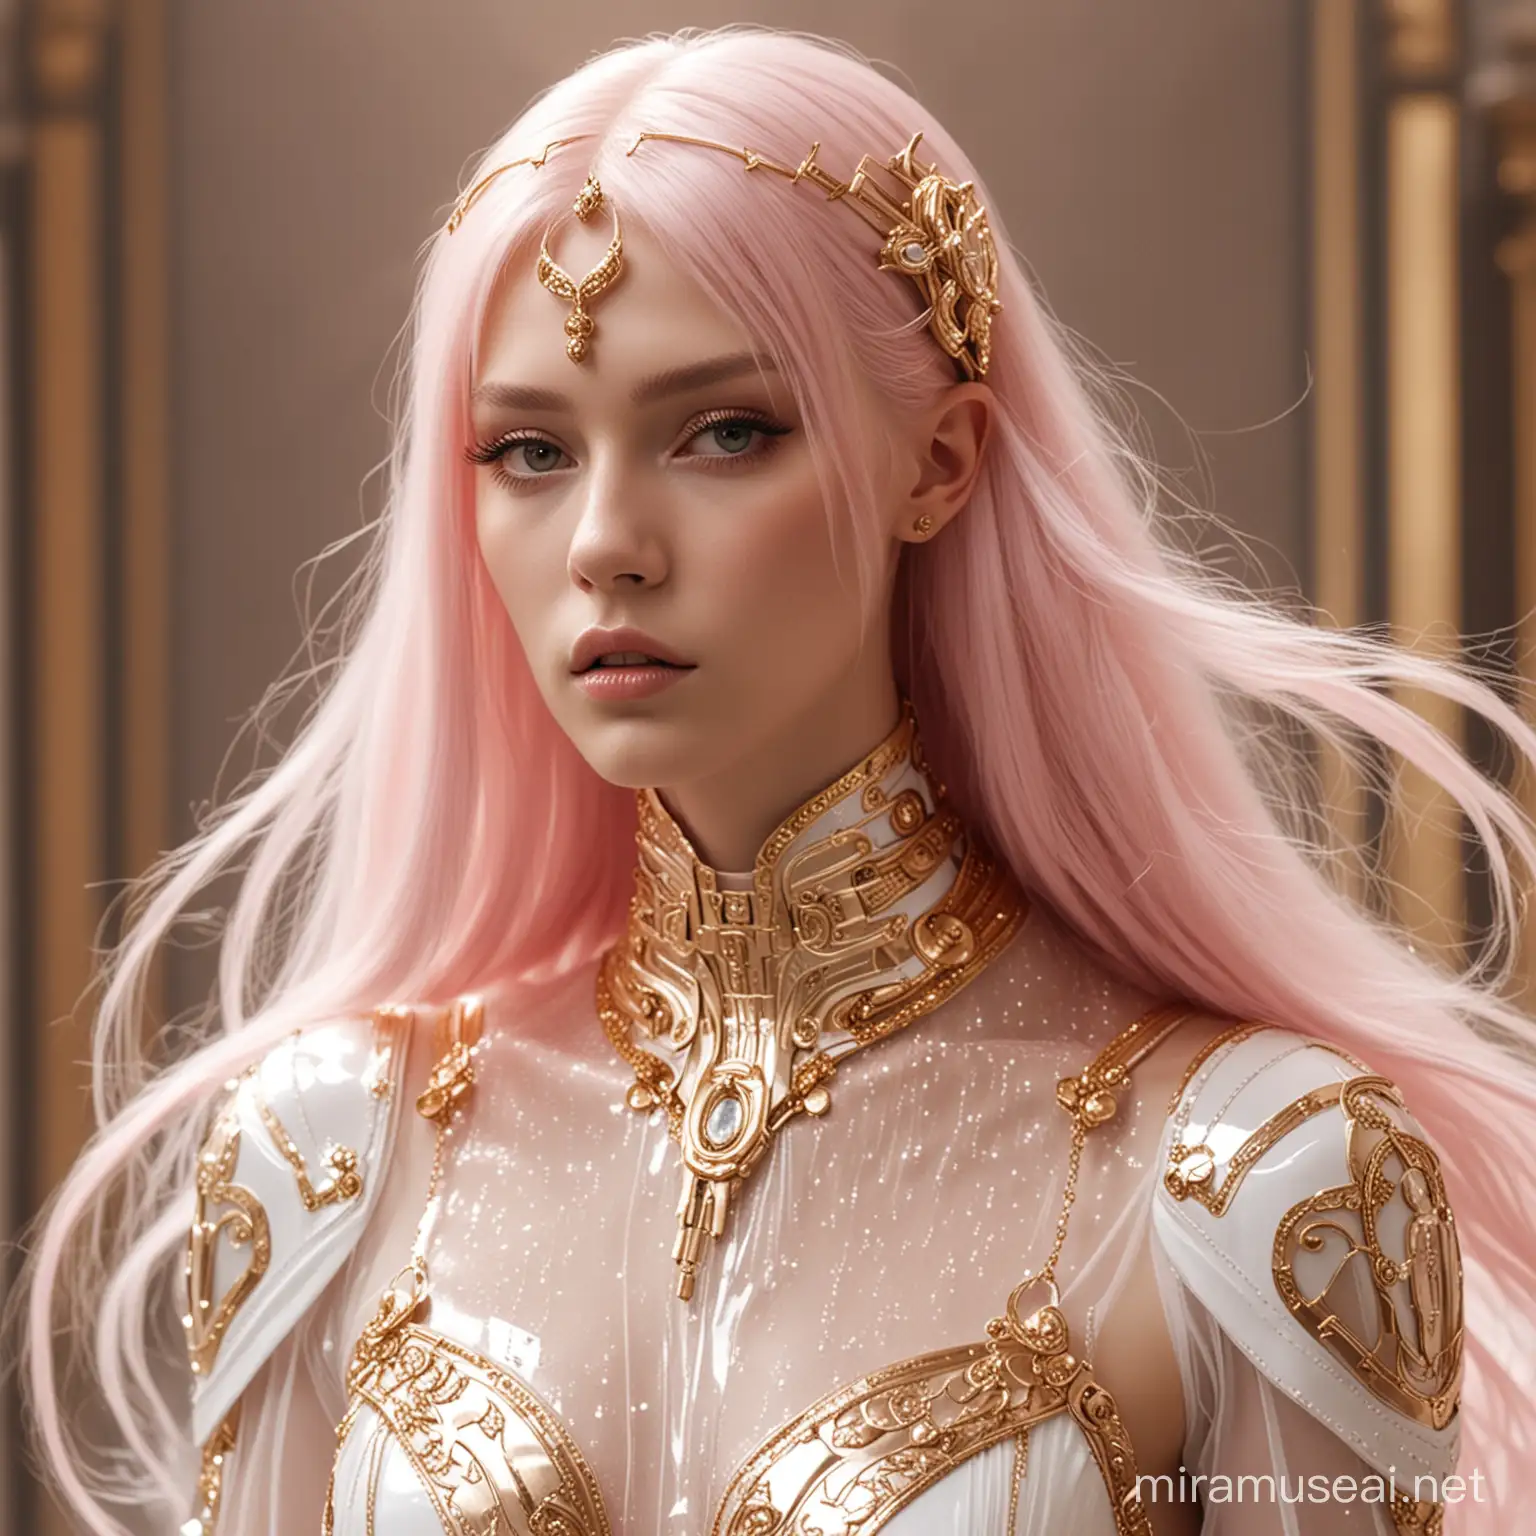 futuristic goddess, gorgeous, ornate epic, fantasy, in floaty futuristic white and gold semitransparent clothing, ethereal long light pink hair, edgy metal hair-clips, soft light, good design sense, in the style of Gucci, highly detailed, movie quality